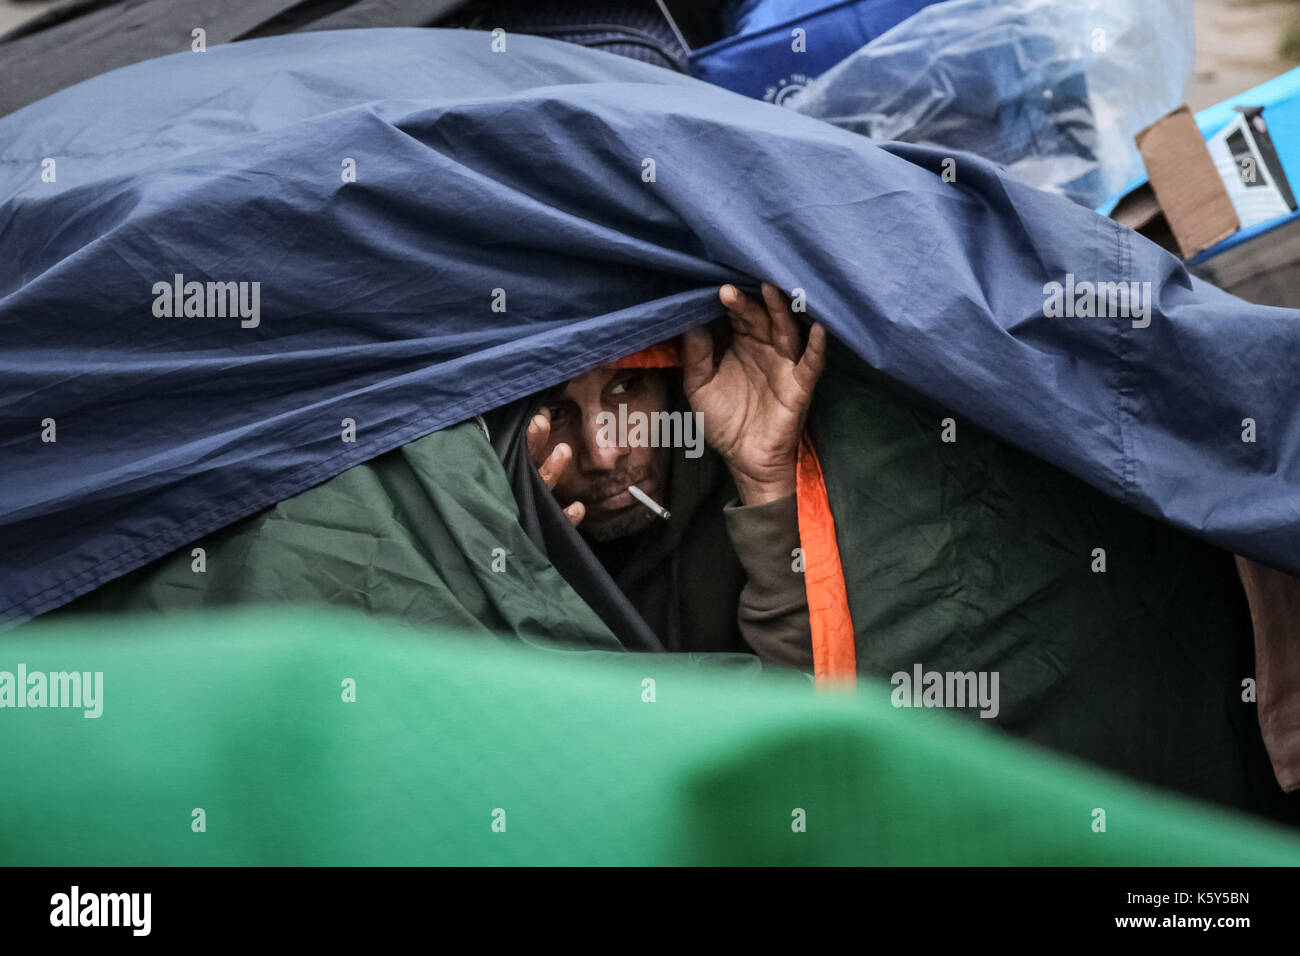 A protester peers from inside their tent on Parliament Square, part of the ‘Democracy Village’ peace campaign which saw multiple activists pitching tents on the pavement area around Parliament Square in Westminster, London, UK. Stock Photo